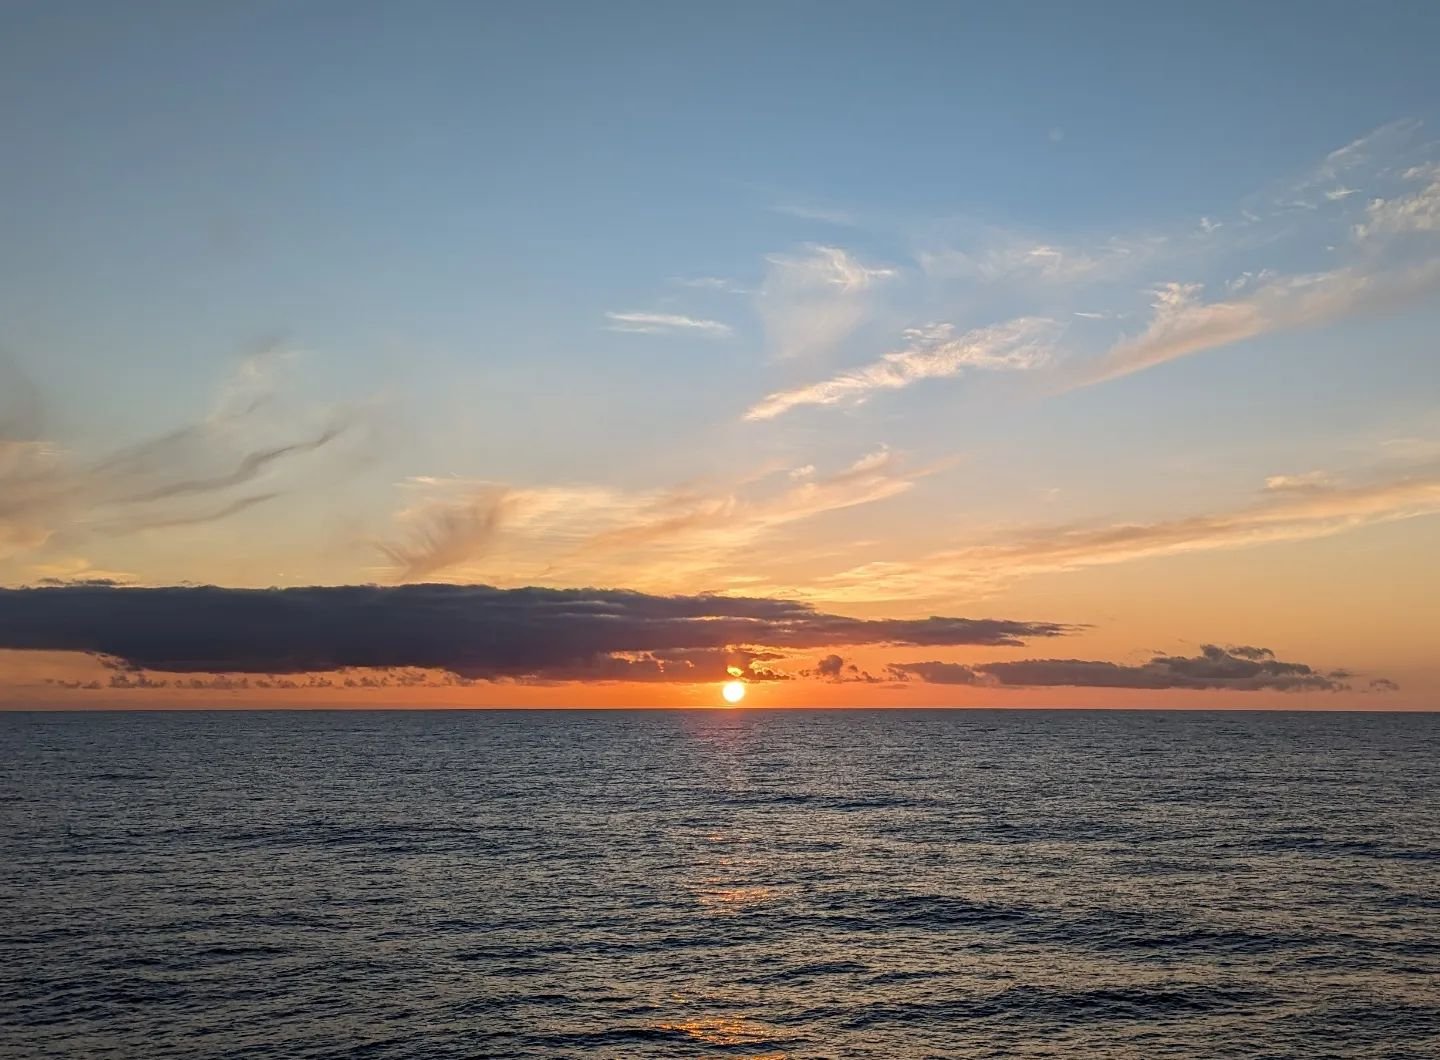 Sunsets at Sea

Five days at sea from America Samoa to Hawaii were filled with so much fun! We crossed the equator and some people needed to kiss the fish. I talked about the ocean's inhabitants.  I learned to play cribbage, to hula, and  enjoyed the